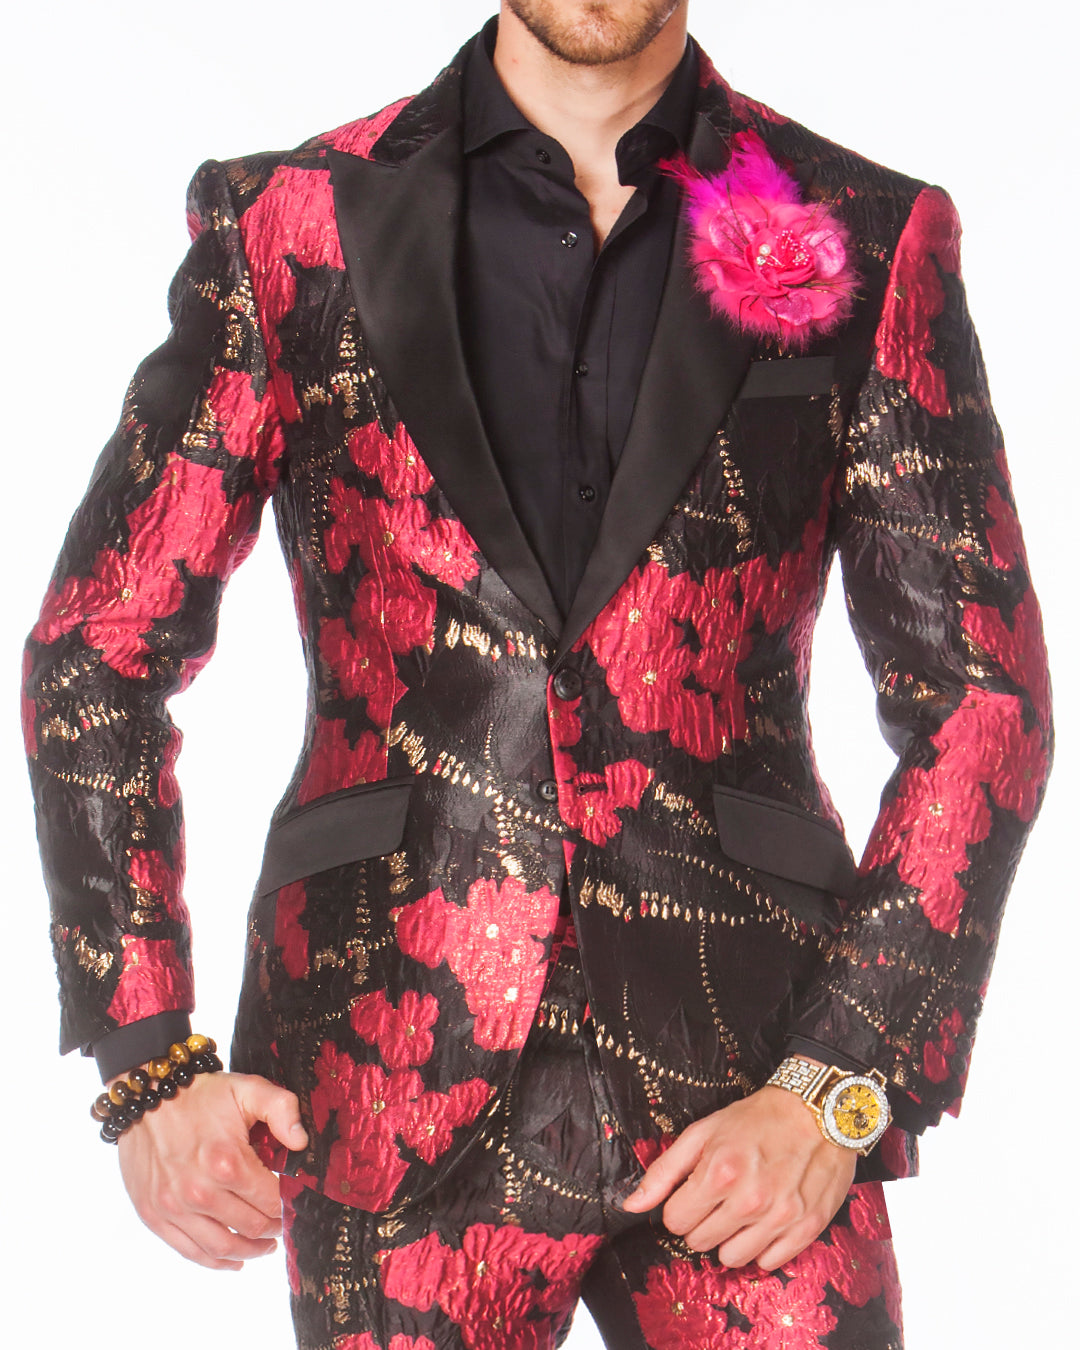 Men Suit Black Double Breasted Paisley Floral Groom Prom Tuxedo Wedding  Suits | eBay